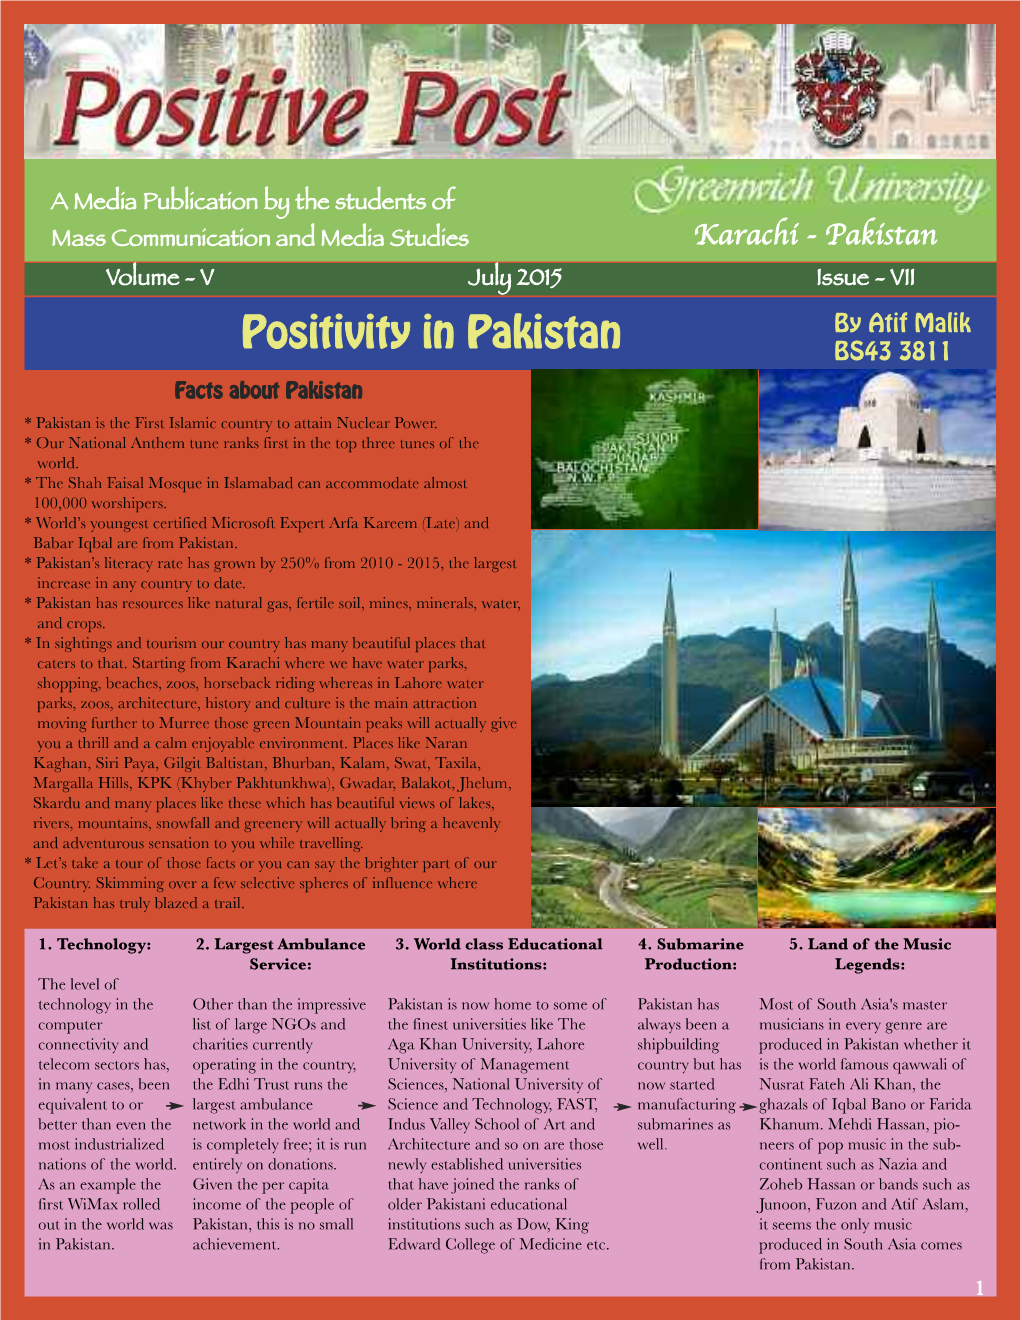 Positivity in Pakistan BS43 3811 Facts About Pakistan * Pakistan Is the First Islamic Country to Attain Nuclear Power